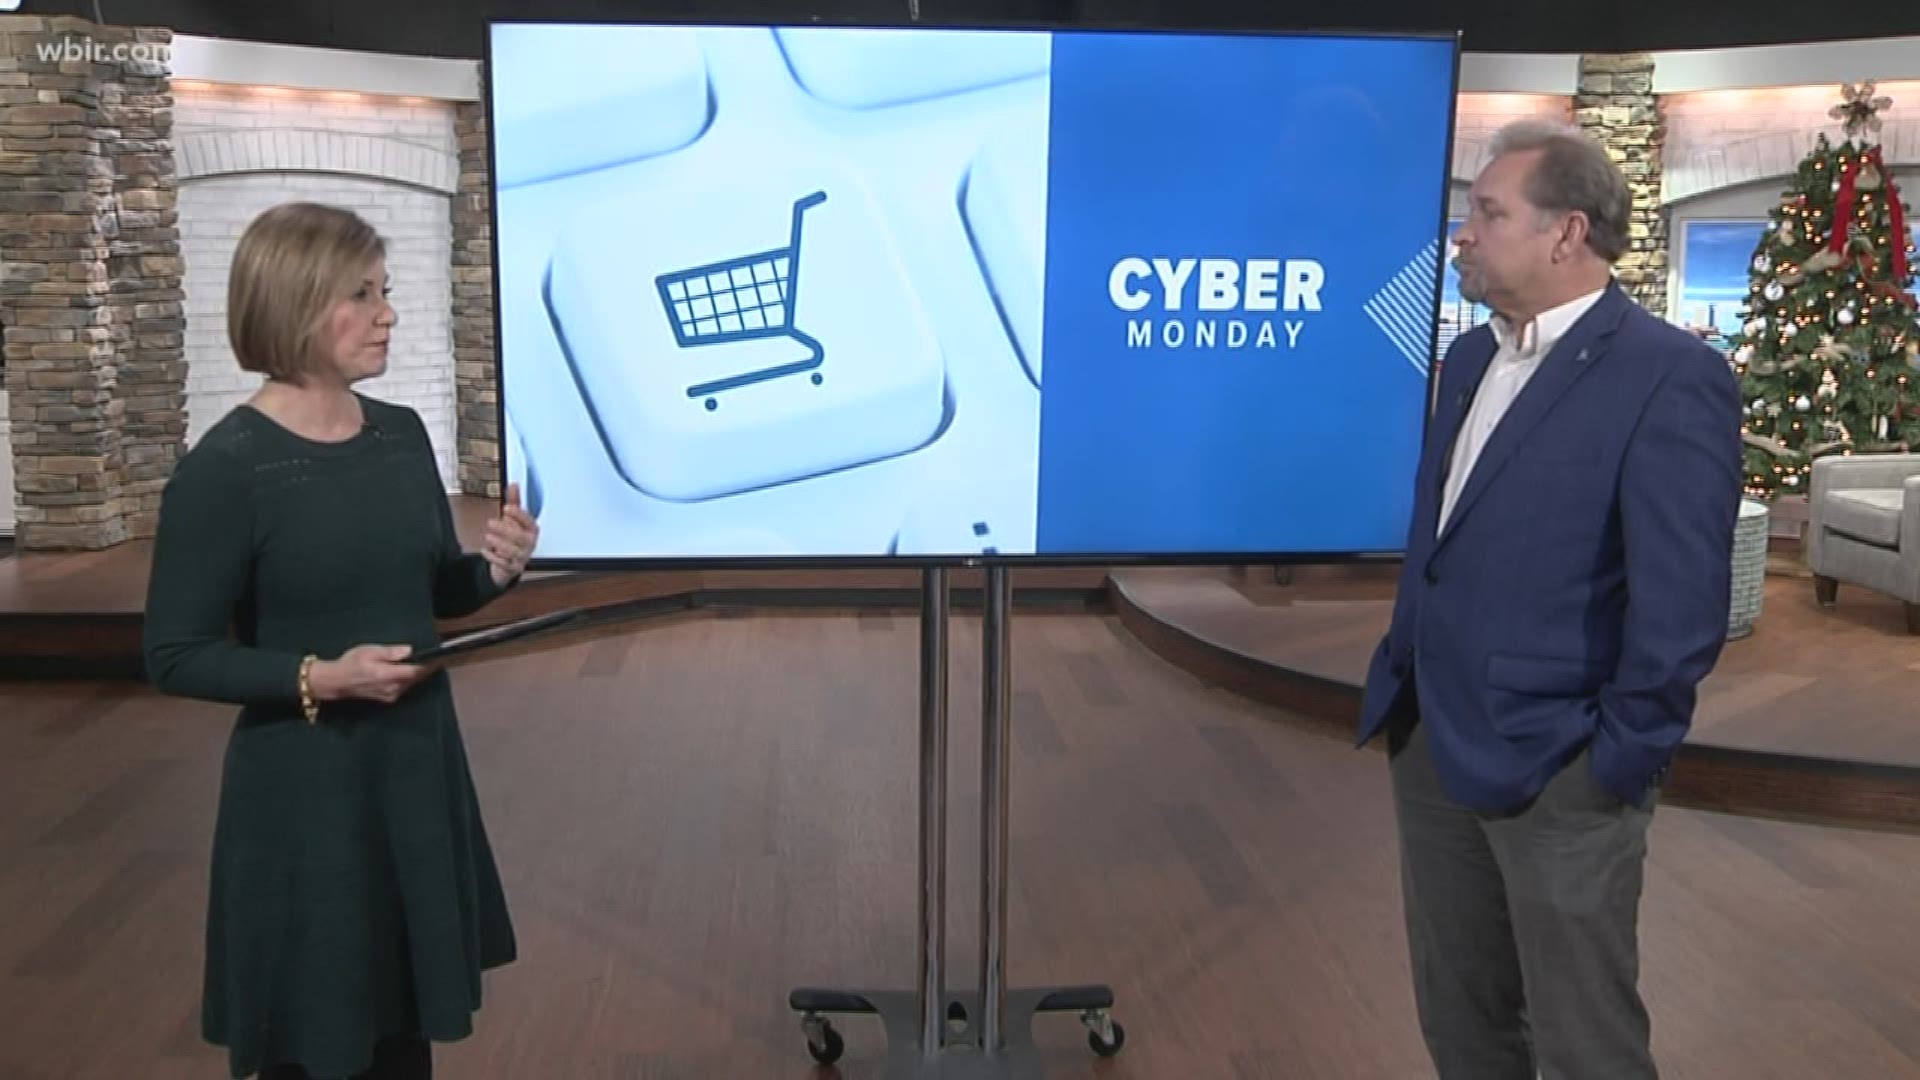 Tony Binkley from the Better Business Bureau talks online shopping safety: avoiding viruses and phony websites, using credit cards, and recovering from scams.